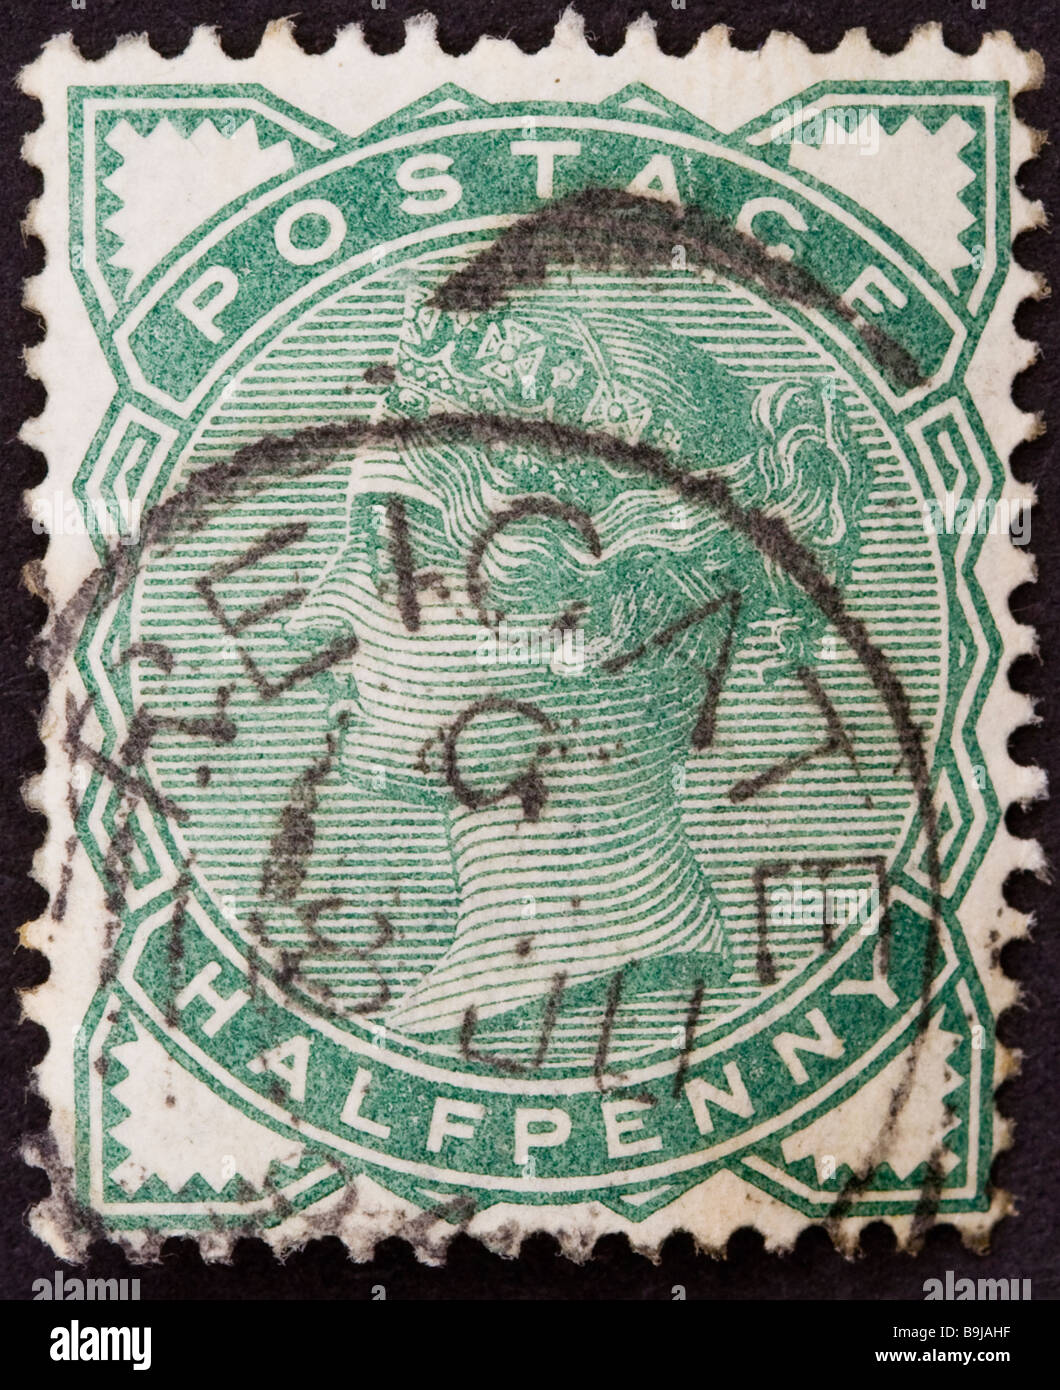 Close up of ½d, half penny green Victorian British Postal stamp on black background 1880 SG 164 used. Round postmarked Reigate. Stock Photo